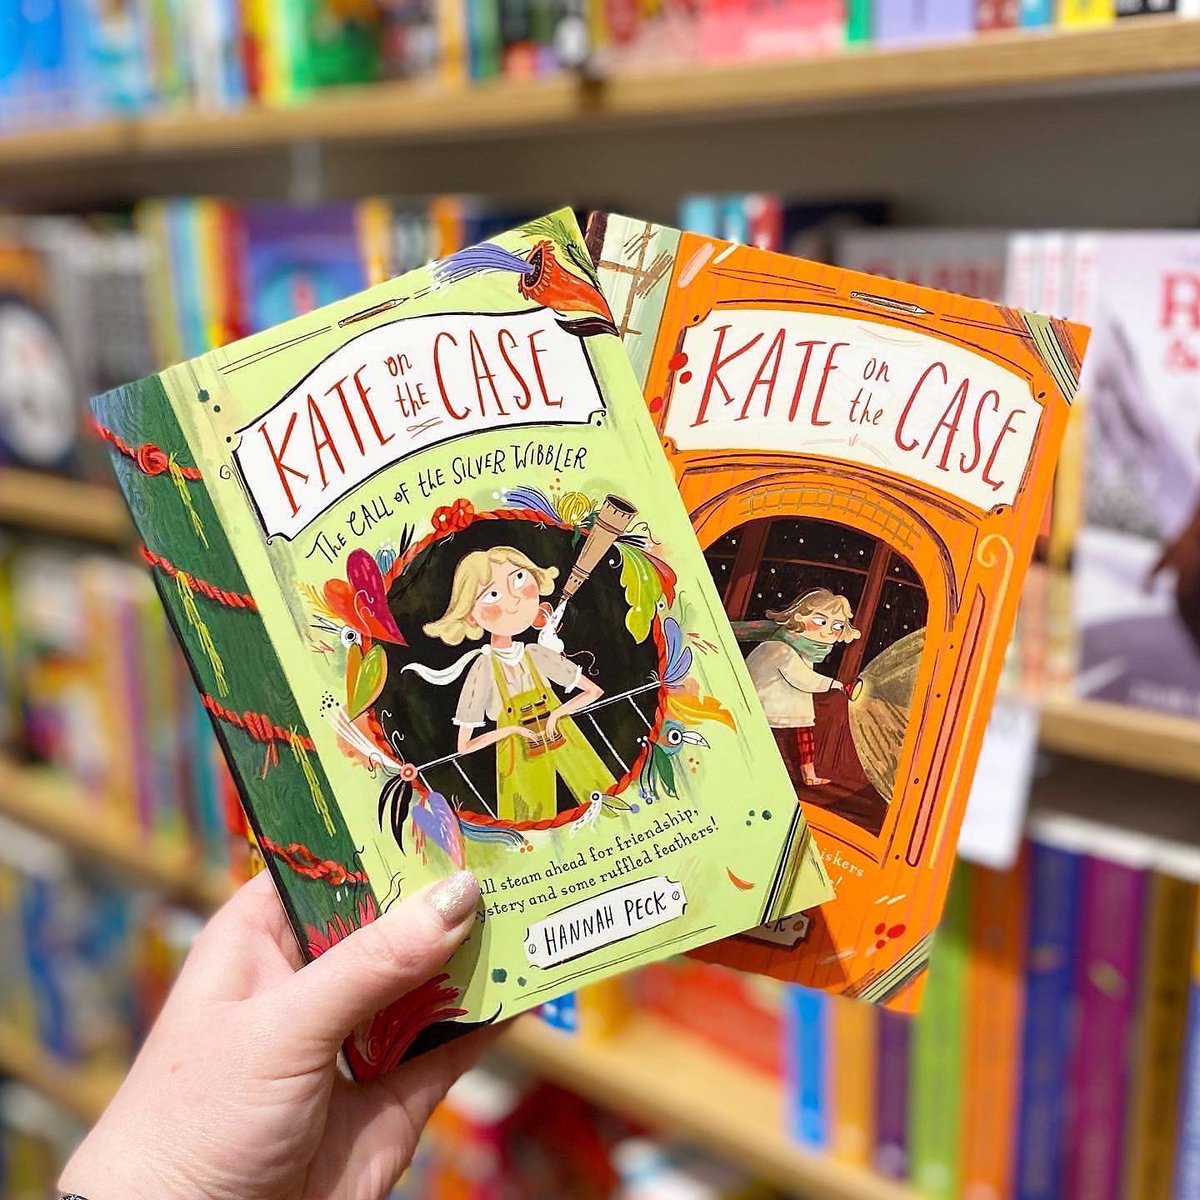 I’m kicking off the blog tour for this wonderful book series #KateontheCase by @hpillustration_ @PiccadillyPress - a funny, whacky and heartwarming adventure! Instagram keeps deleting my post so I’ll post my review as a thread here… 1/3